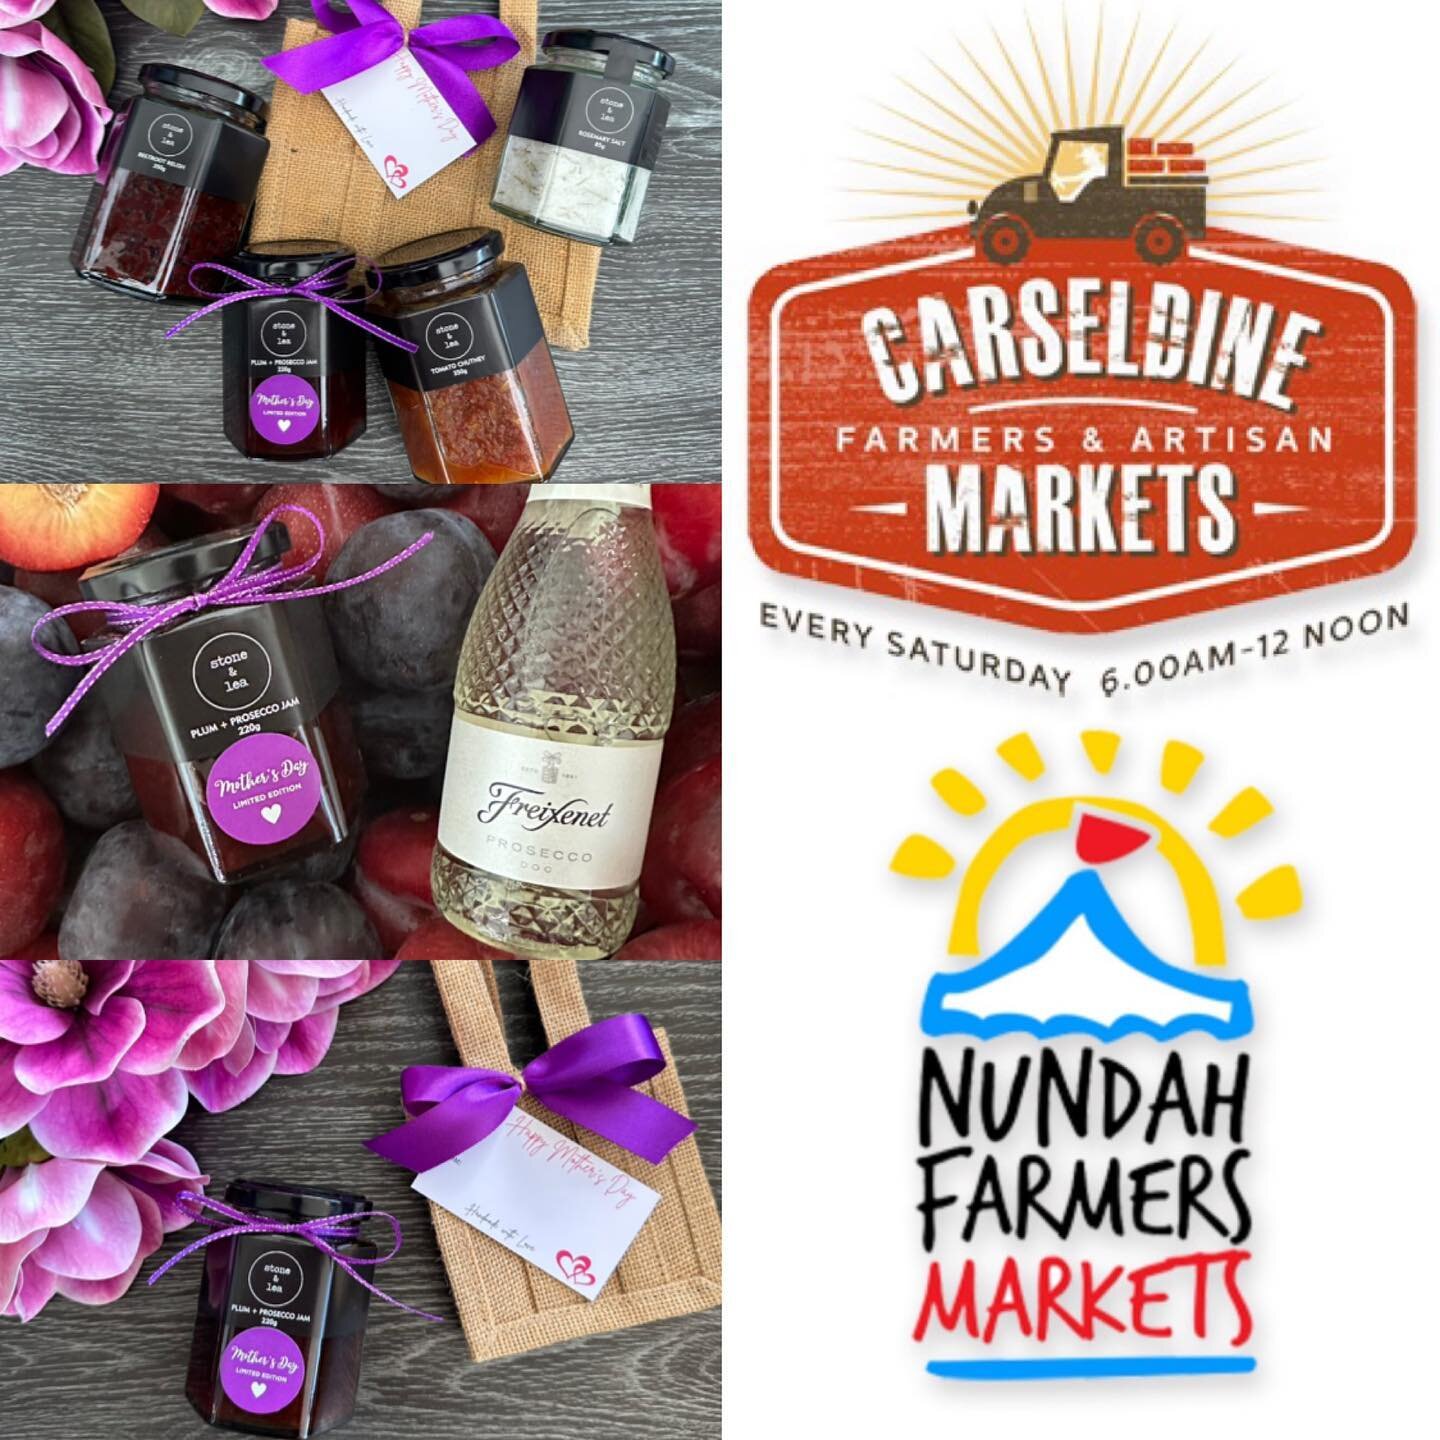 Treat your Mum this 𝓜𝓸𝓽𝓱𝓮𝓻&rsquo;𝓼 𝓓𝓪𝔂 with our #jarsofgoodness 💜🥂 at the Markets this weekend
𝙎𝙖𝙩𝙪𝙧𝙙𝙖𝙮- @carseldinefarmersmarkets
𝙎𝙪𝙣𝙙𝙖𝙮- @nundahmarkets

🛒 Click &amp; collect from our online SHOP

https://www.stoneandlea.